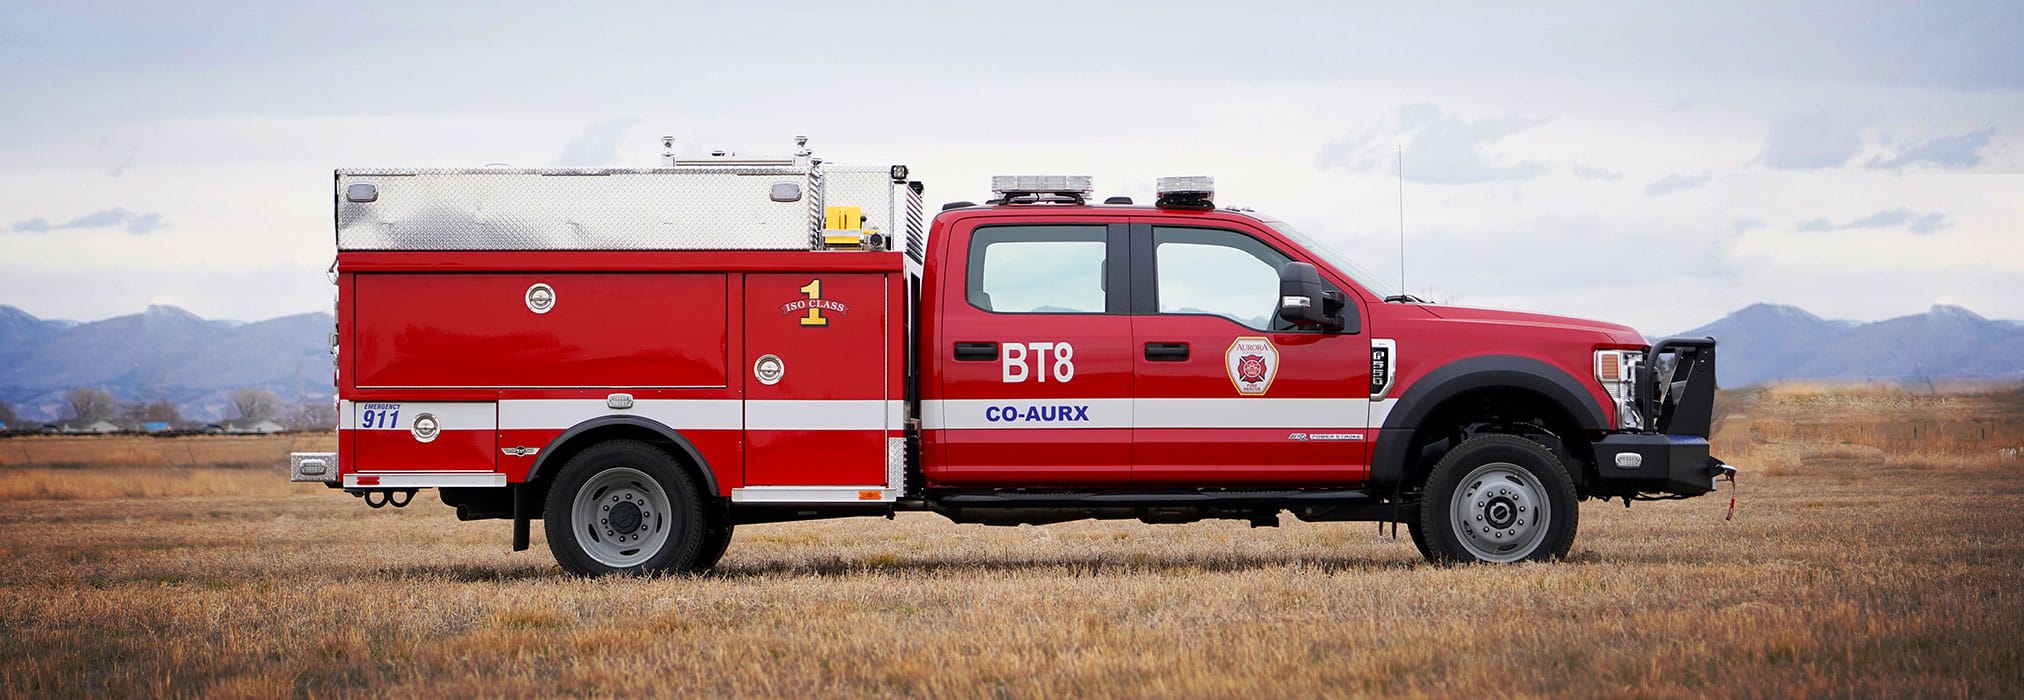 curb side view of Aurora's type 6 brush fire truck